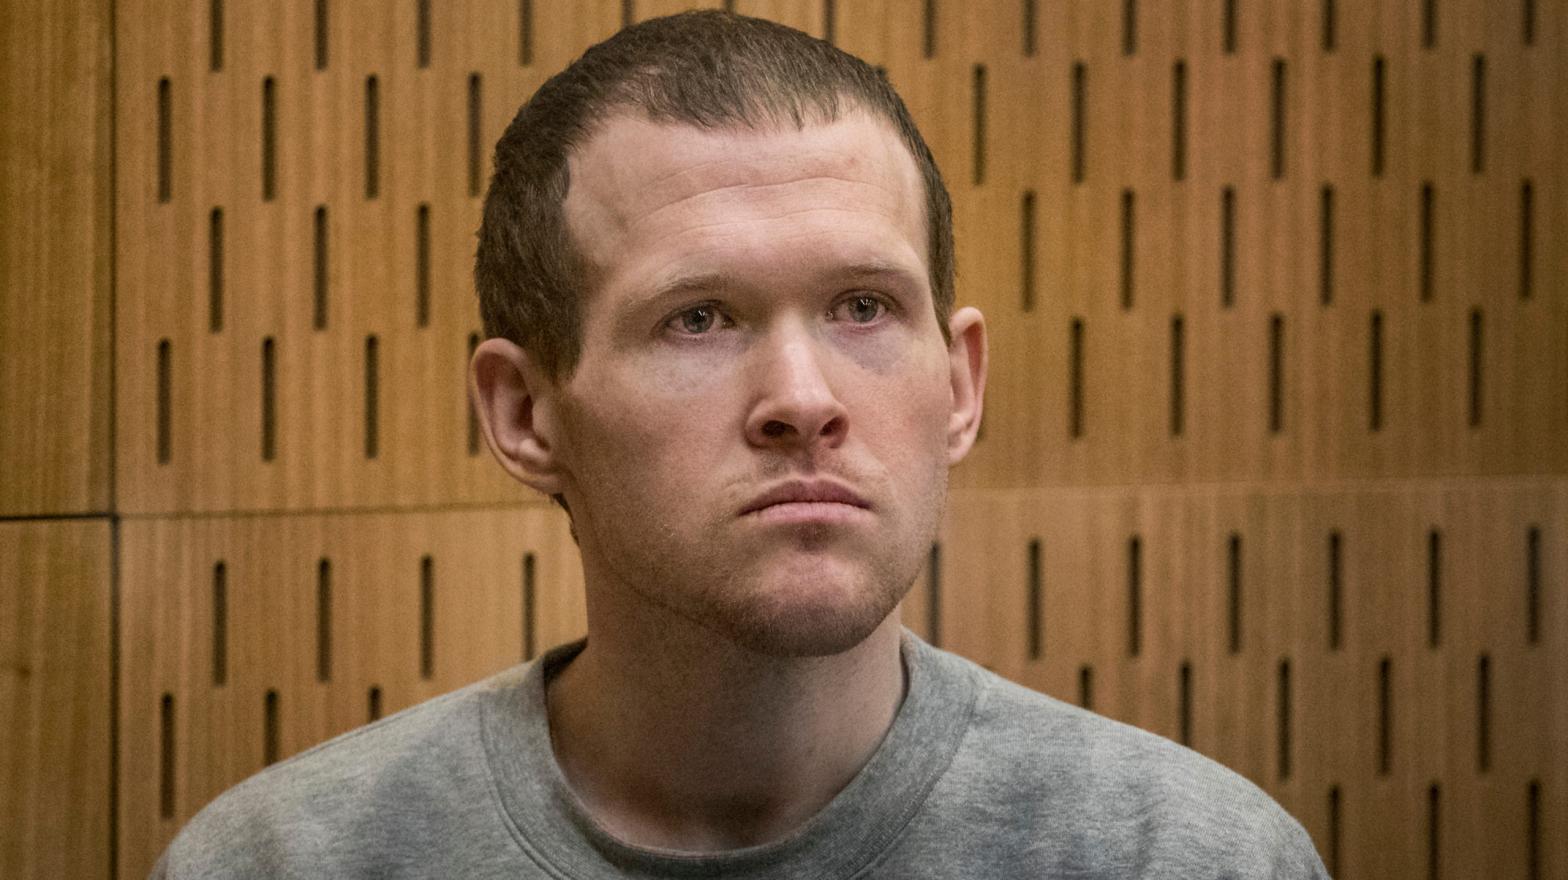 White supremacist terrorist Brenton Tarrant sits in the Christchurch High Court in Christchurch, New Zealand on August 25, 2020. (Photo: John Kirk-Anderson, AP)